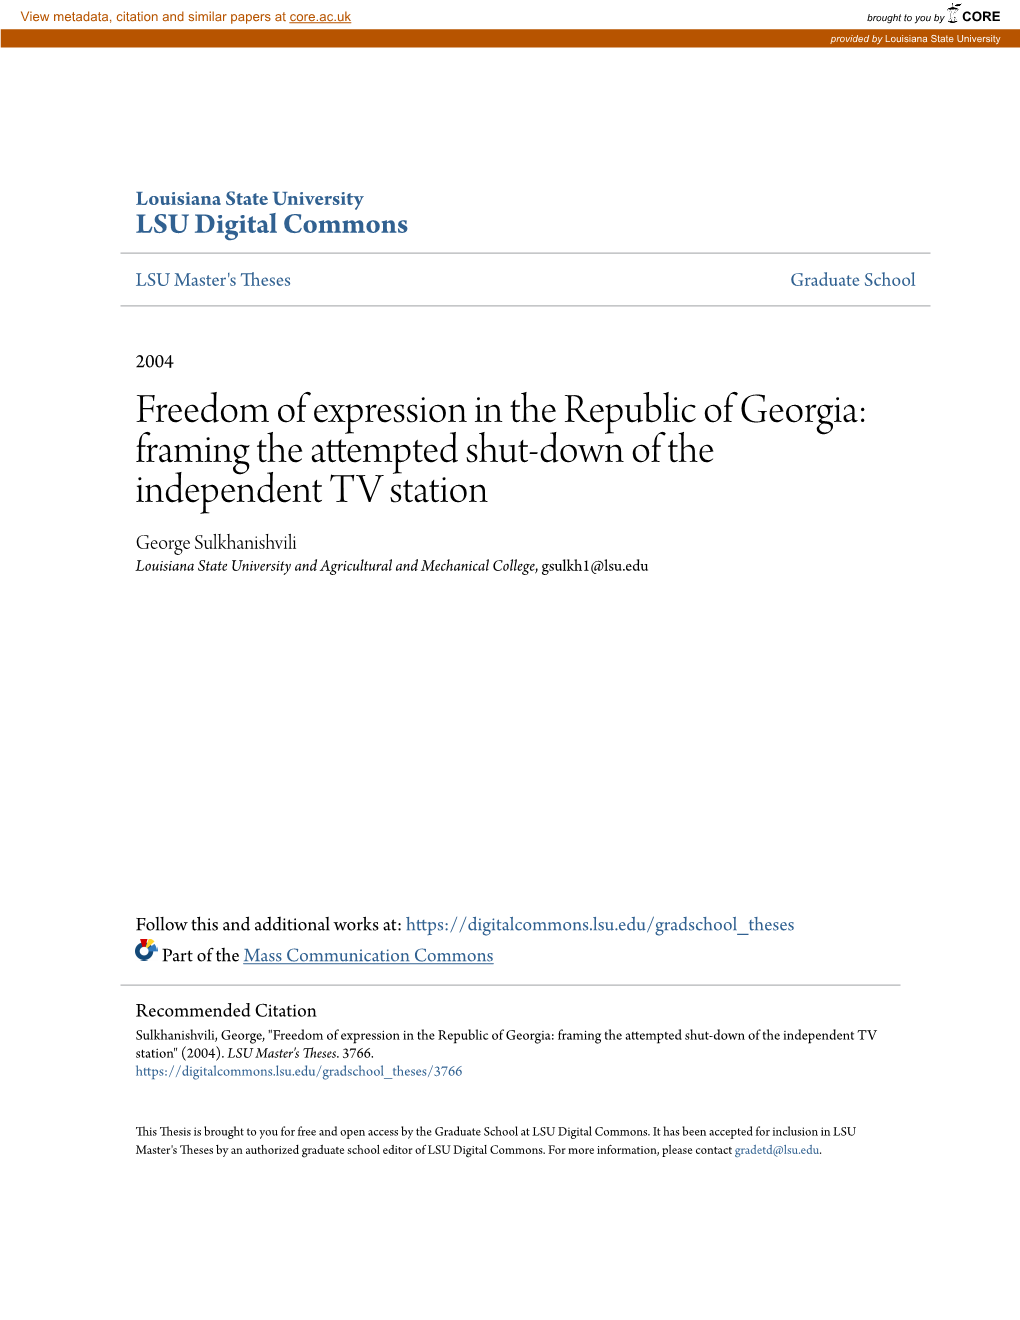 Framing the Attempted Shut-Down of the Independent TV Station